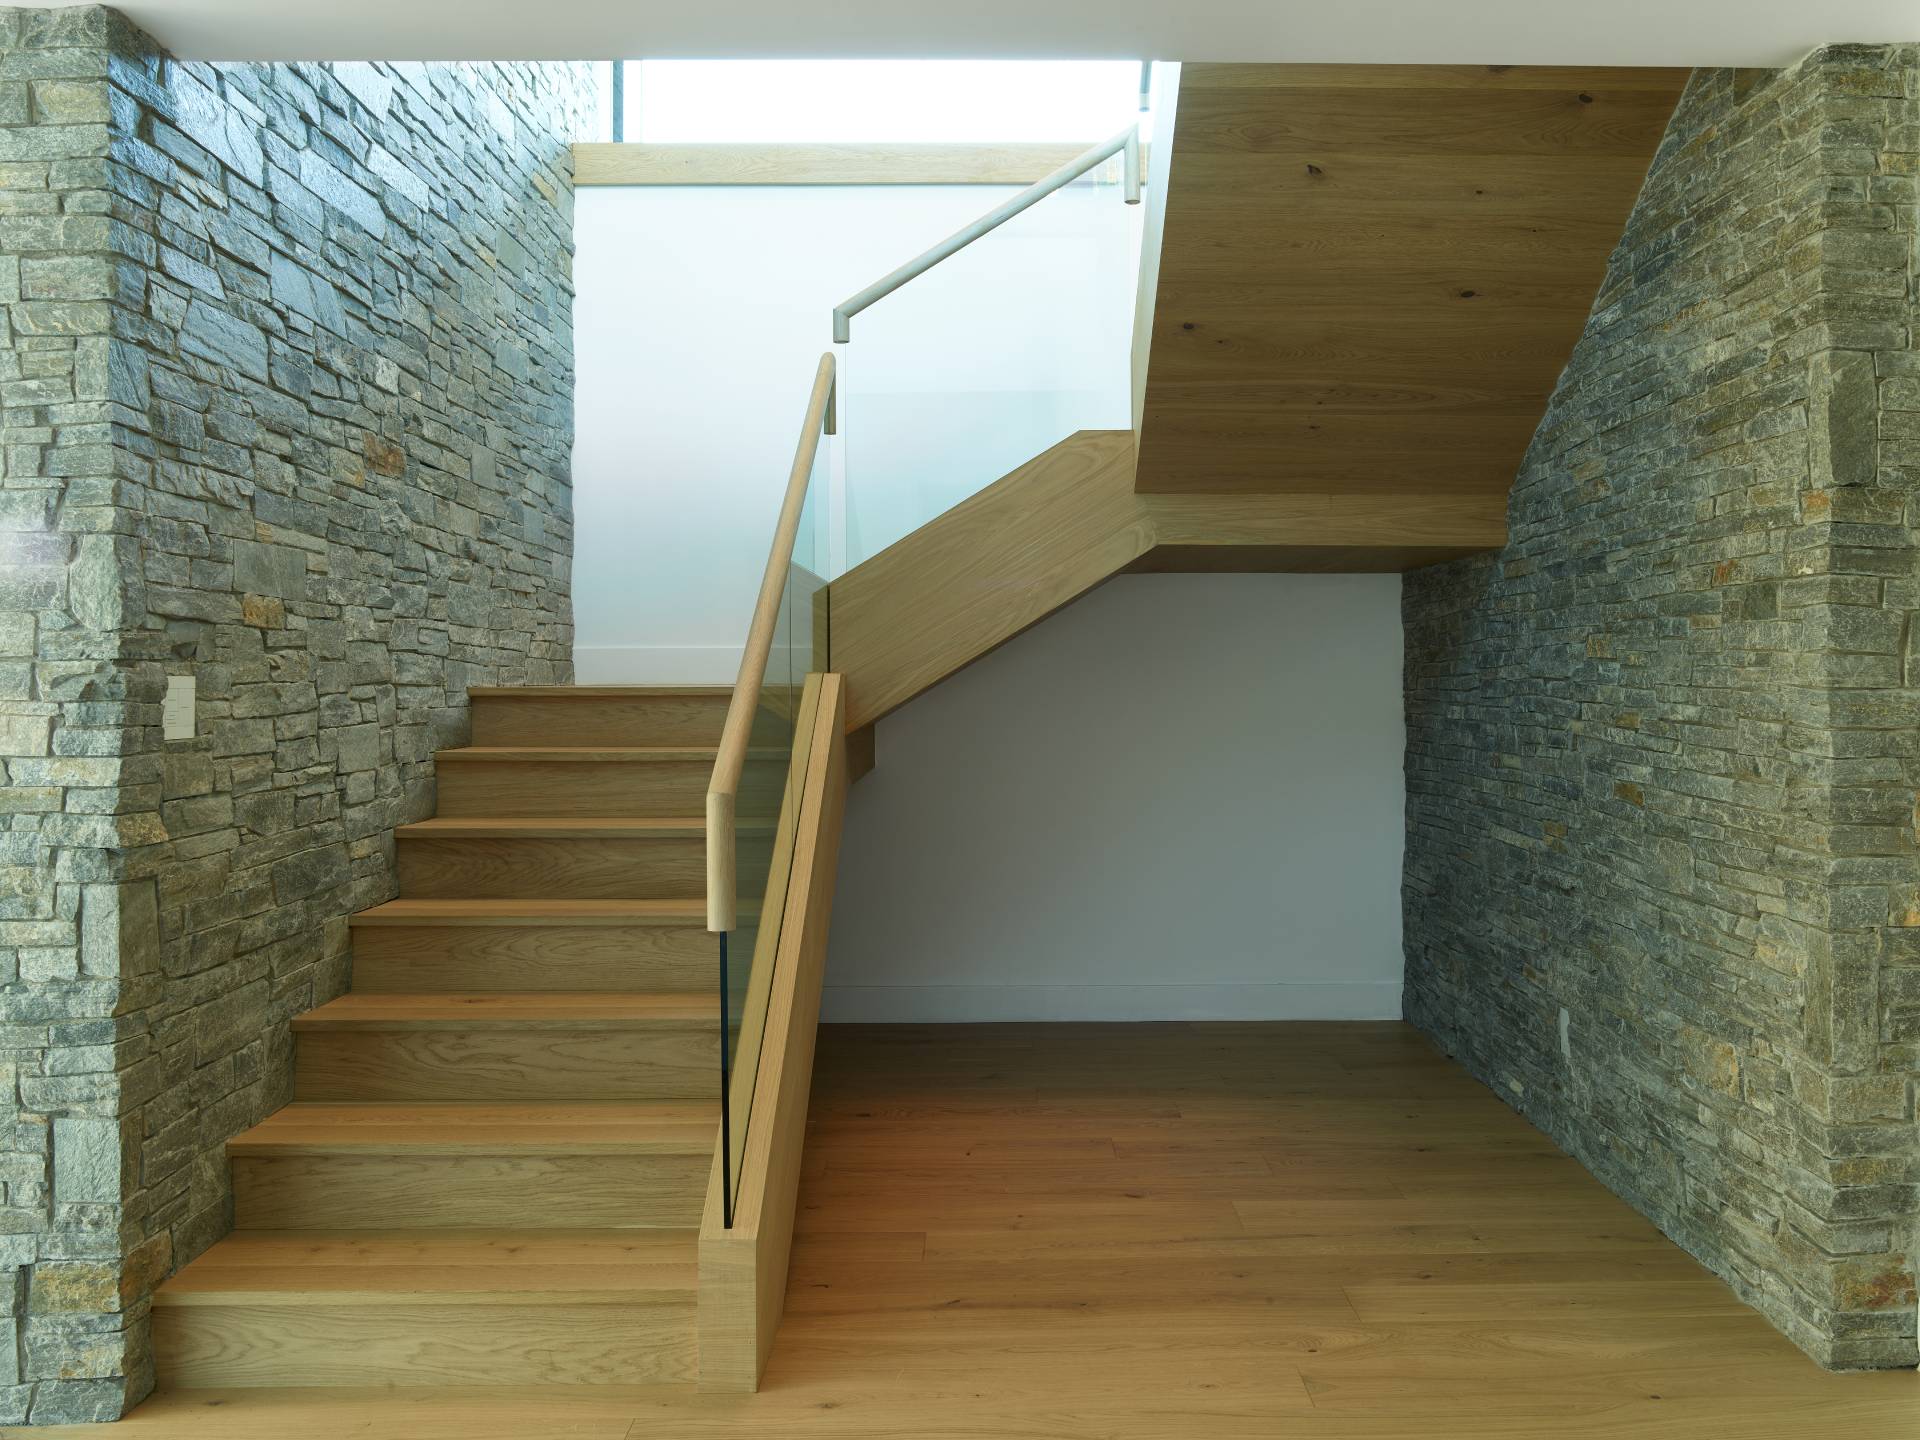 Interior view of the stairwell at Cache Creek South, a custom home designed and built by Farmer Payne Architects.